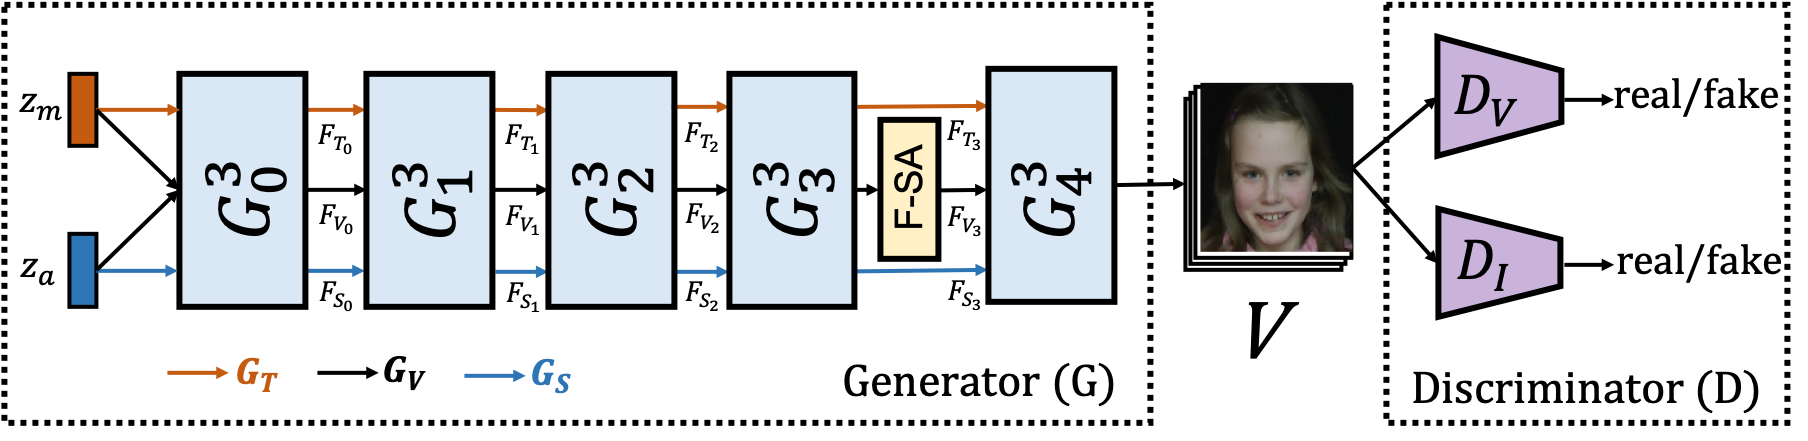 Overview of our G3^{3}AN architecture. G3^{3}AN consists of a three-stream Generator and a two-stream Discriminator. The Generator contains five stacked G3^3 modules, a factorized self-attention (F-SA) module, and takes as input two random noise vectors, zaz_a and zmz_m, aiming at representing appearance and motion, respectively. Details of architecture can be found in Supplementary Material (SM).